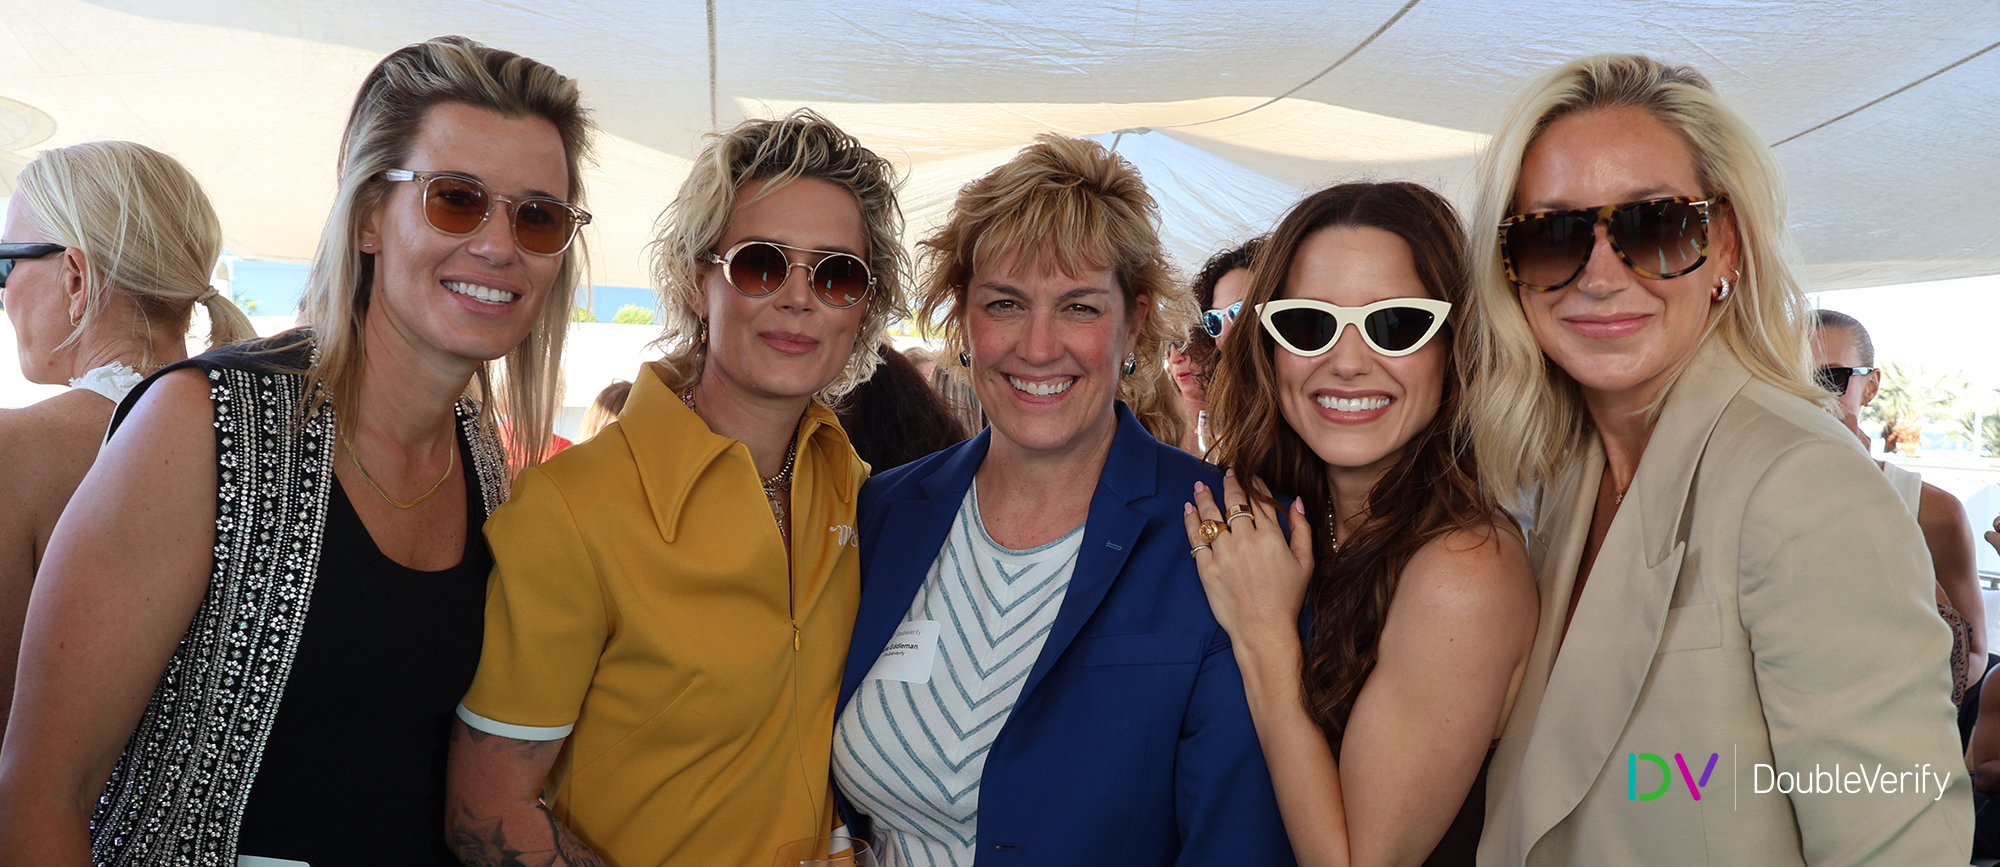 Photo taken on DV's yacht at the 2024 Cannes Lions International Festival of Creativity showing five women standing side-by-side and facing the camera while smiling.